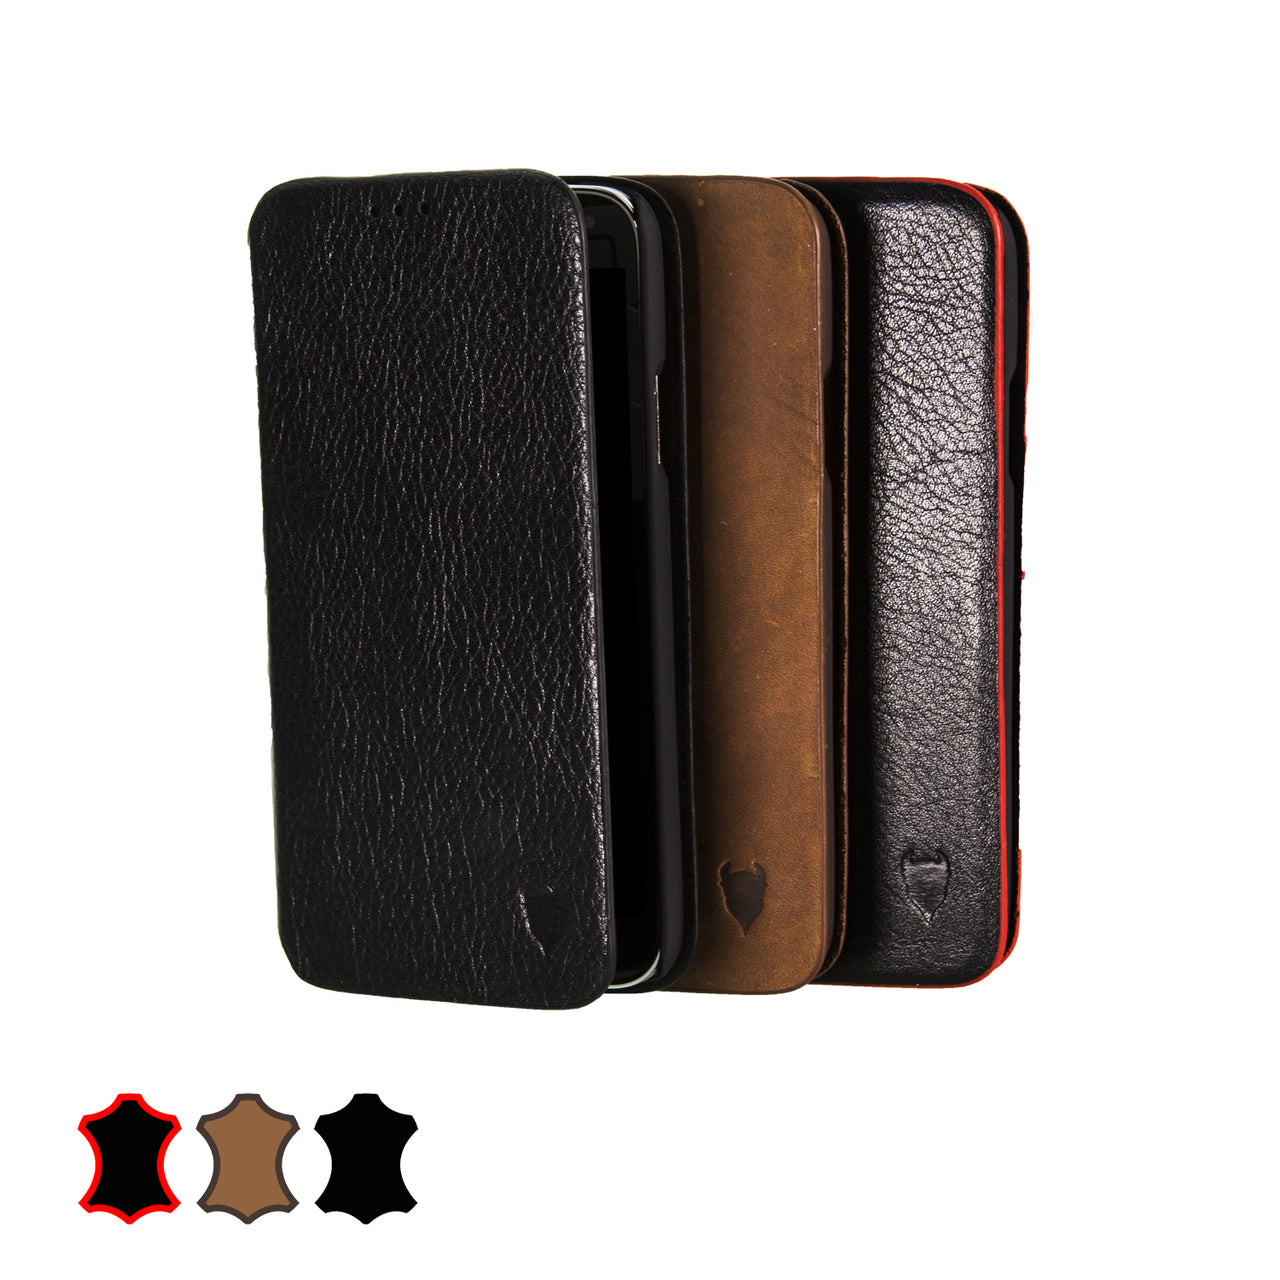 Samsung Galaxy S5 Genuine Leather Case with Stand | Artisancover